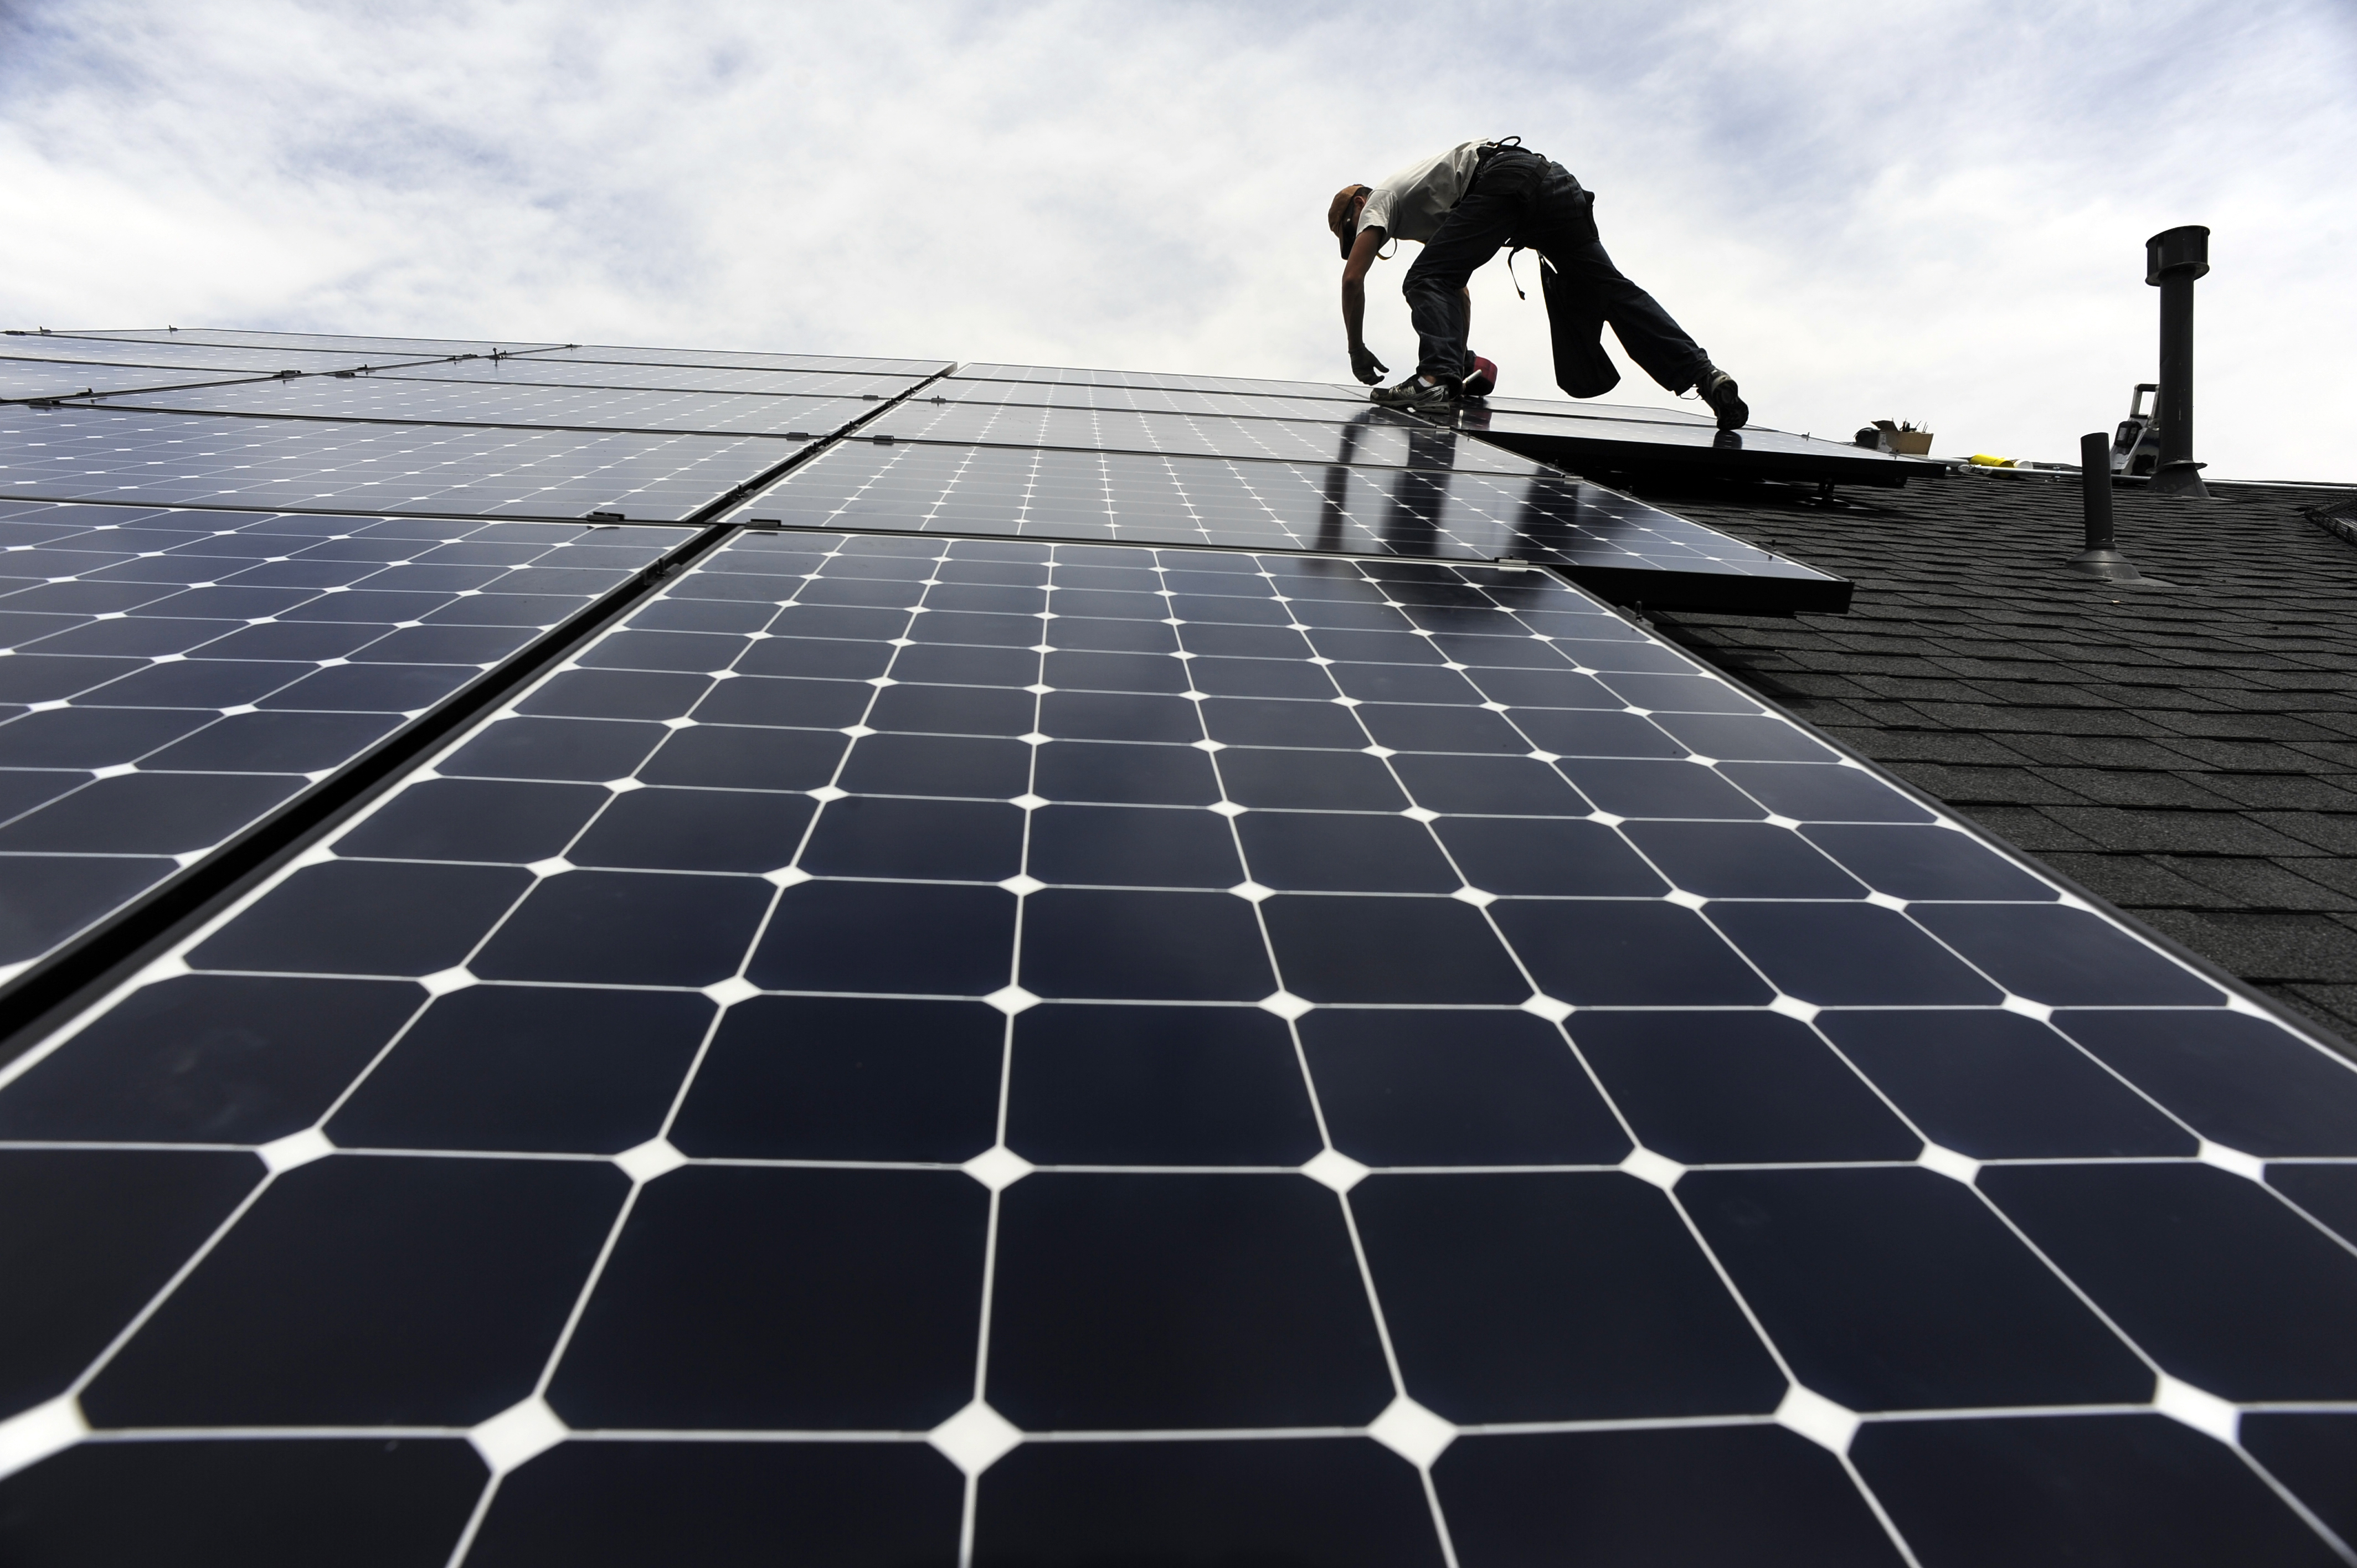 Solar installer, Justin Woodbury, Namaste (accent over the e) Solar, secures solar panels for a photovoltaic solar array system on the roof of a house in the Sorrel Ranch area, near e-470 and Smoky hill Road in Aurora Friday afternoon in record temperatur